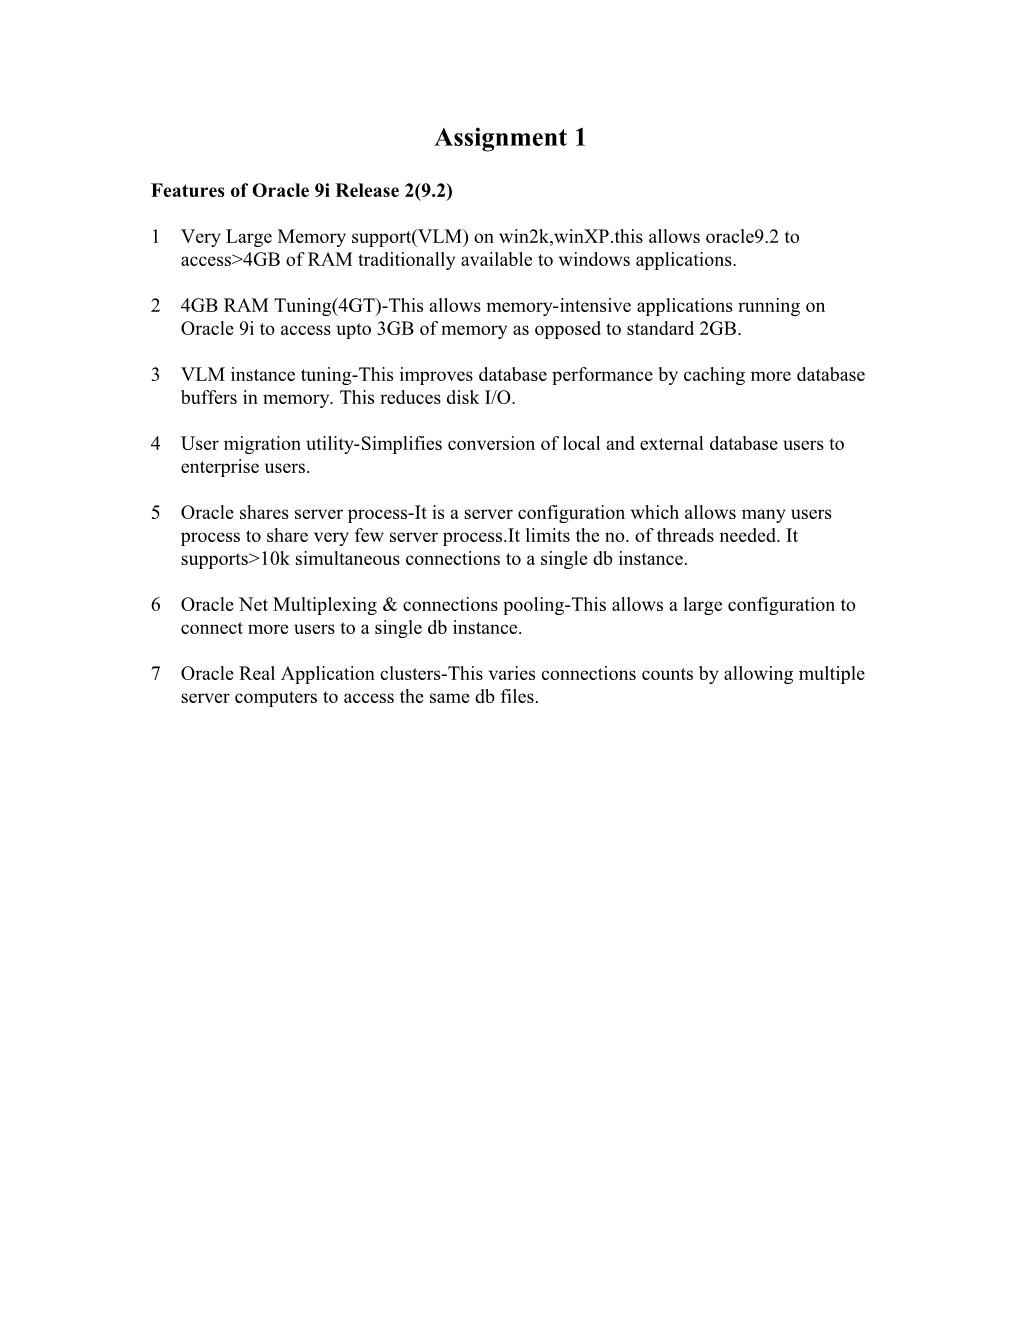 Features of Oracle 9I Release 2(9